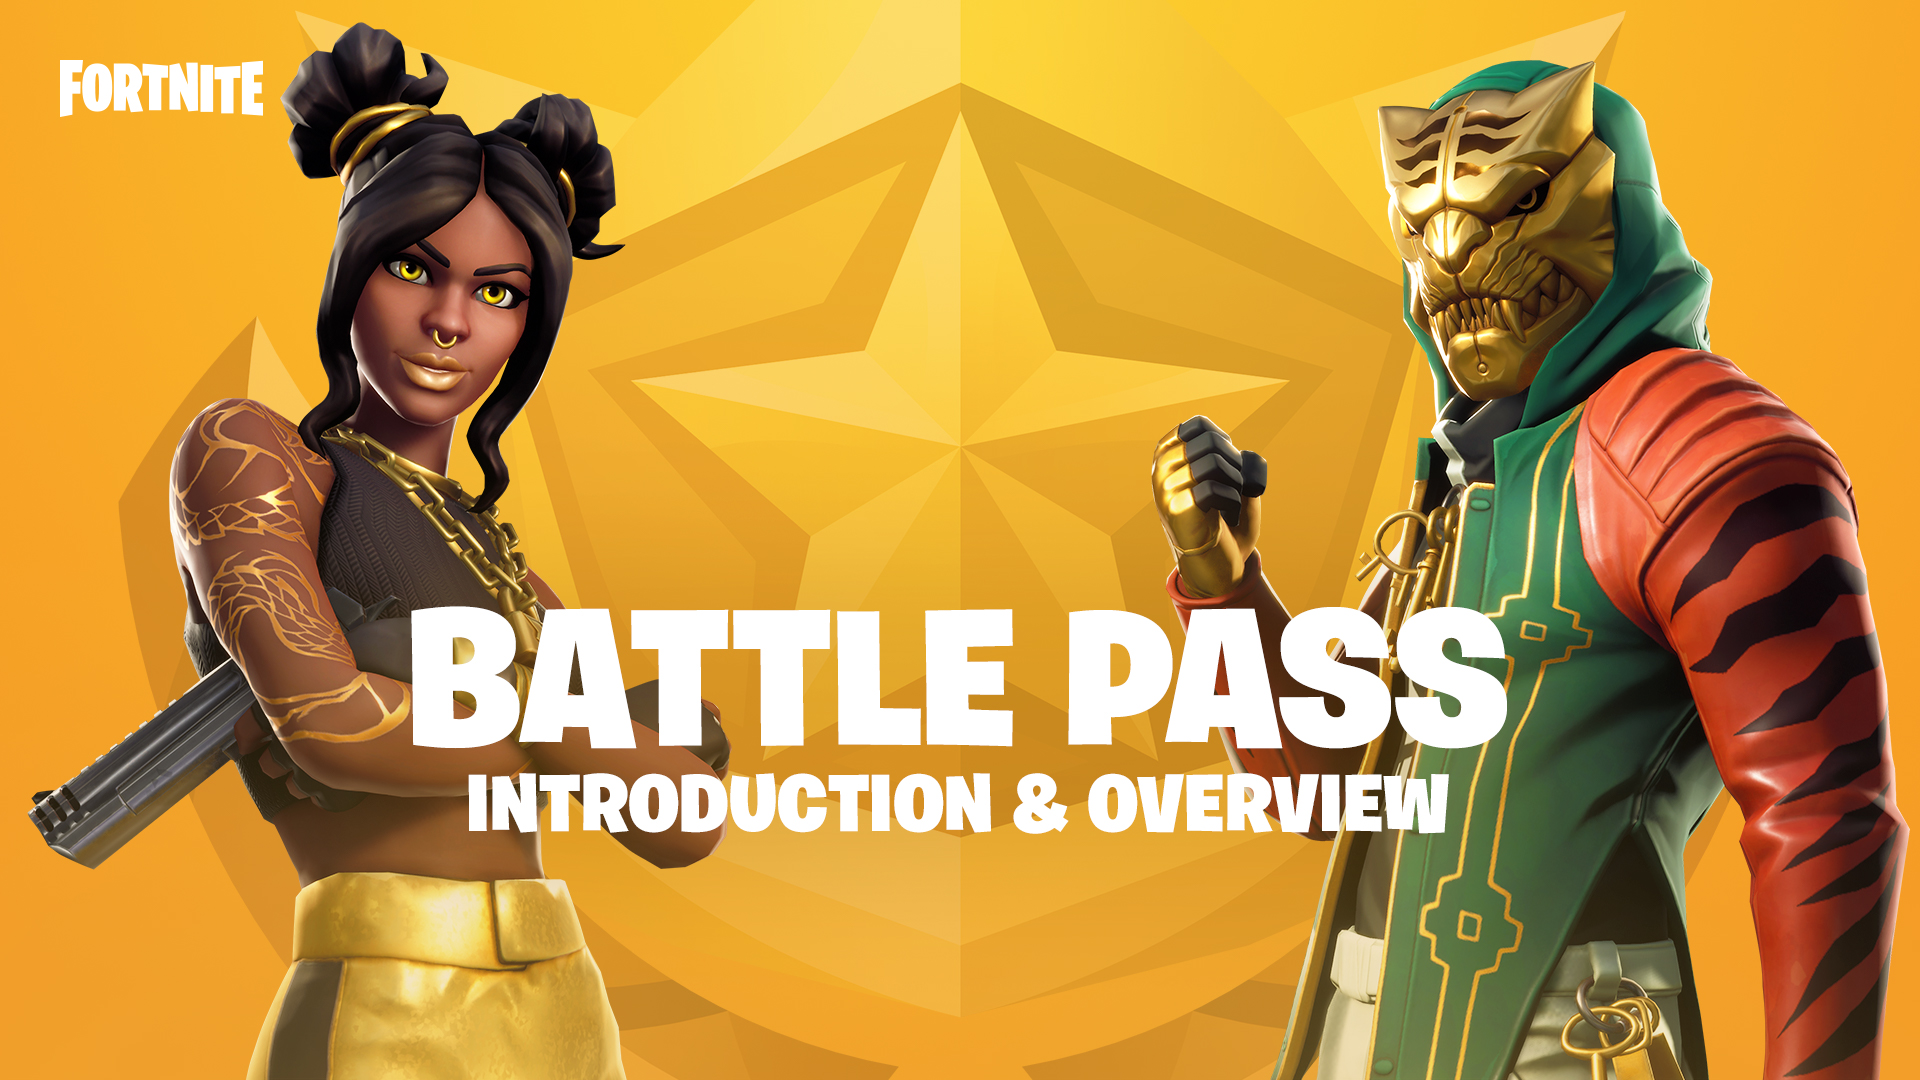 play fortnite battle pass introduction overview with two characters on an orange star background - how to get free v bucks on mobile season 8